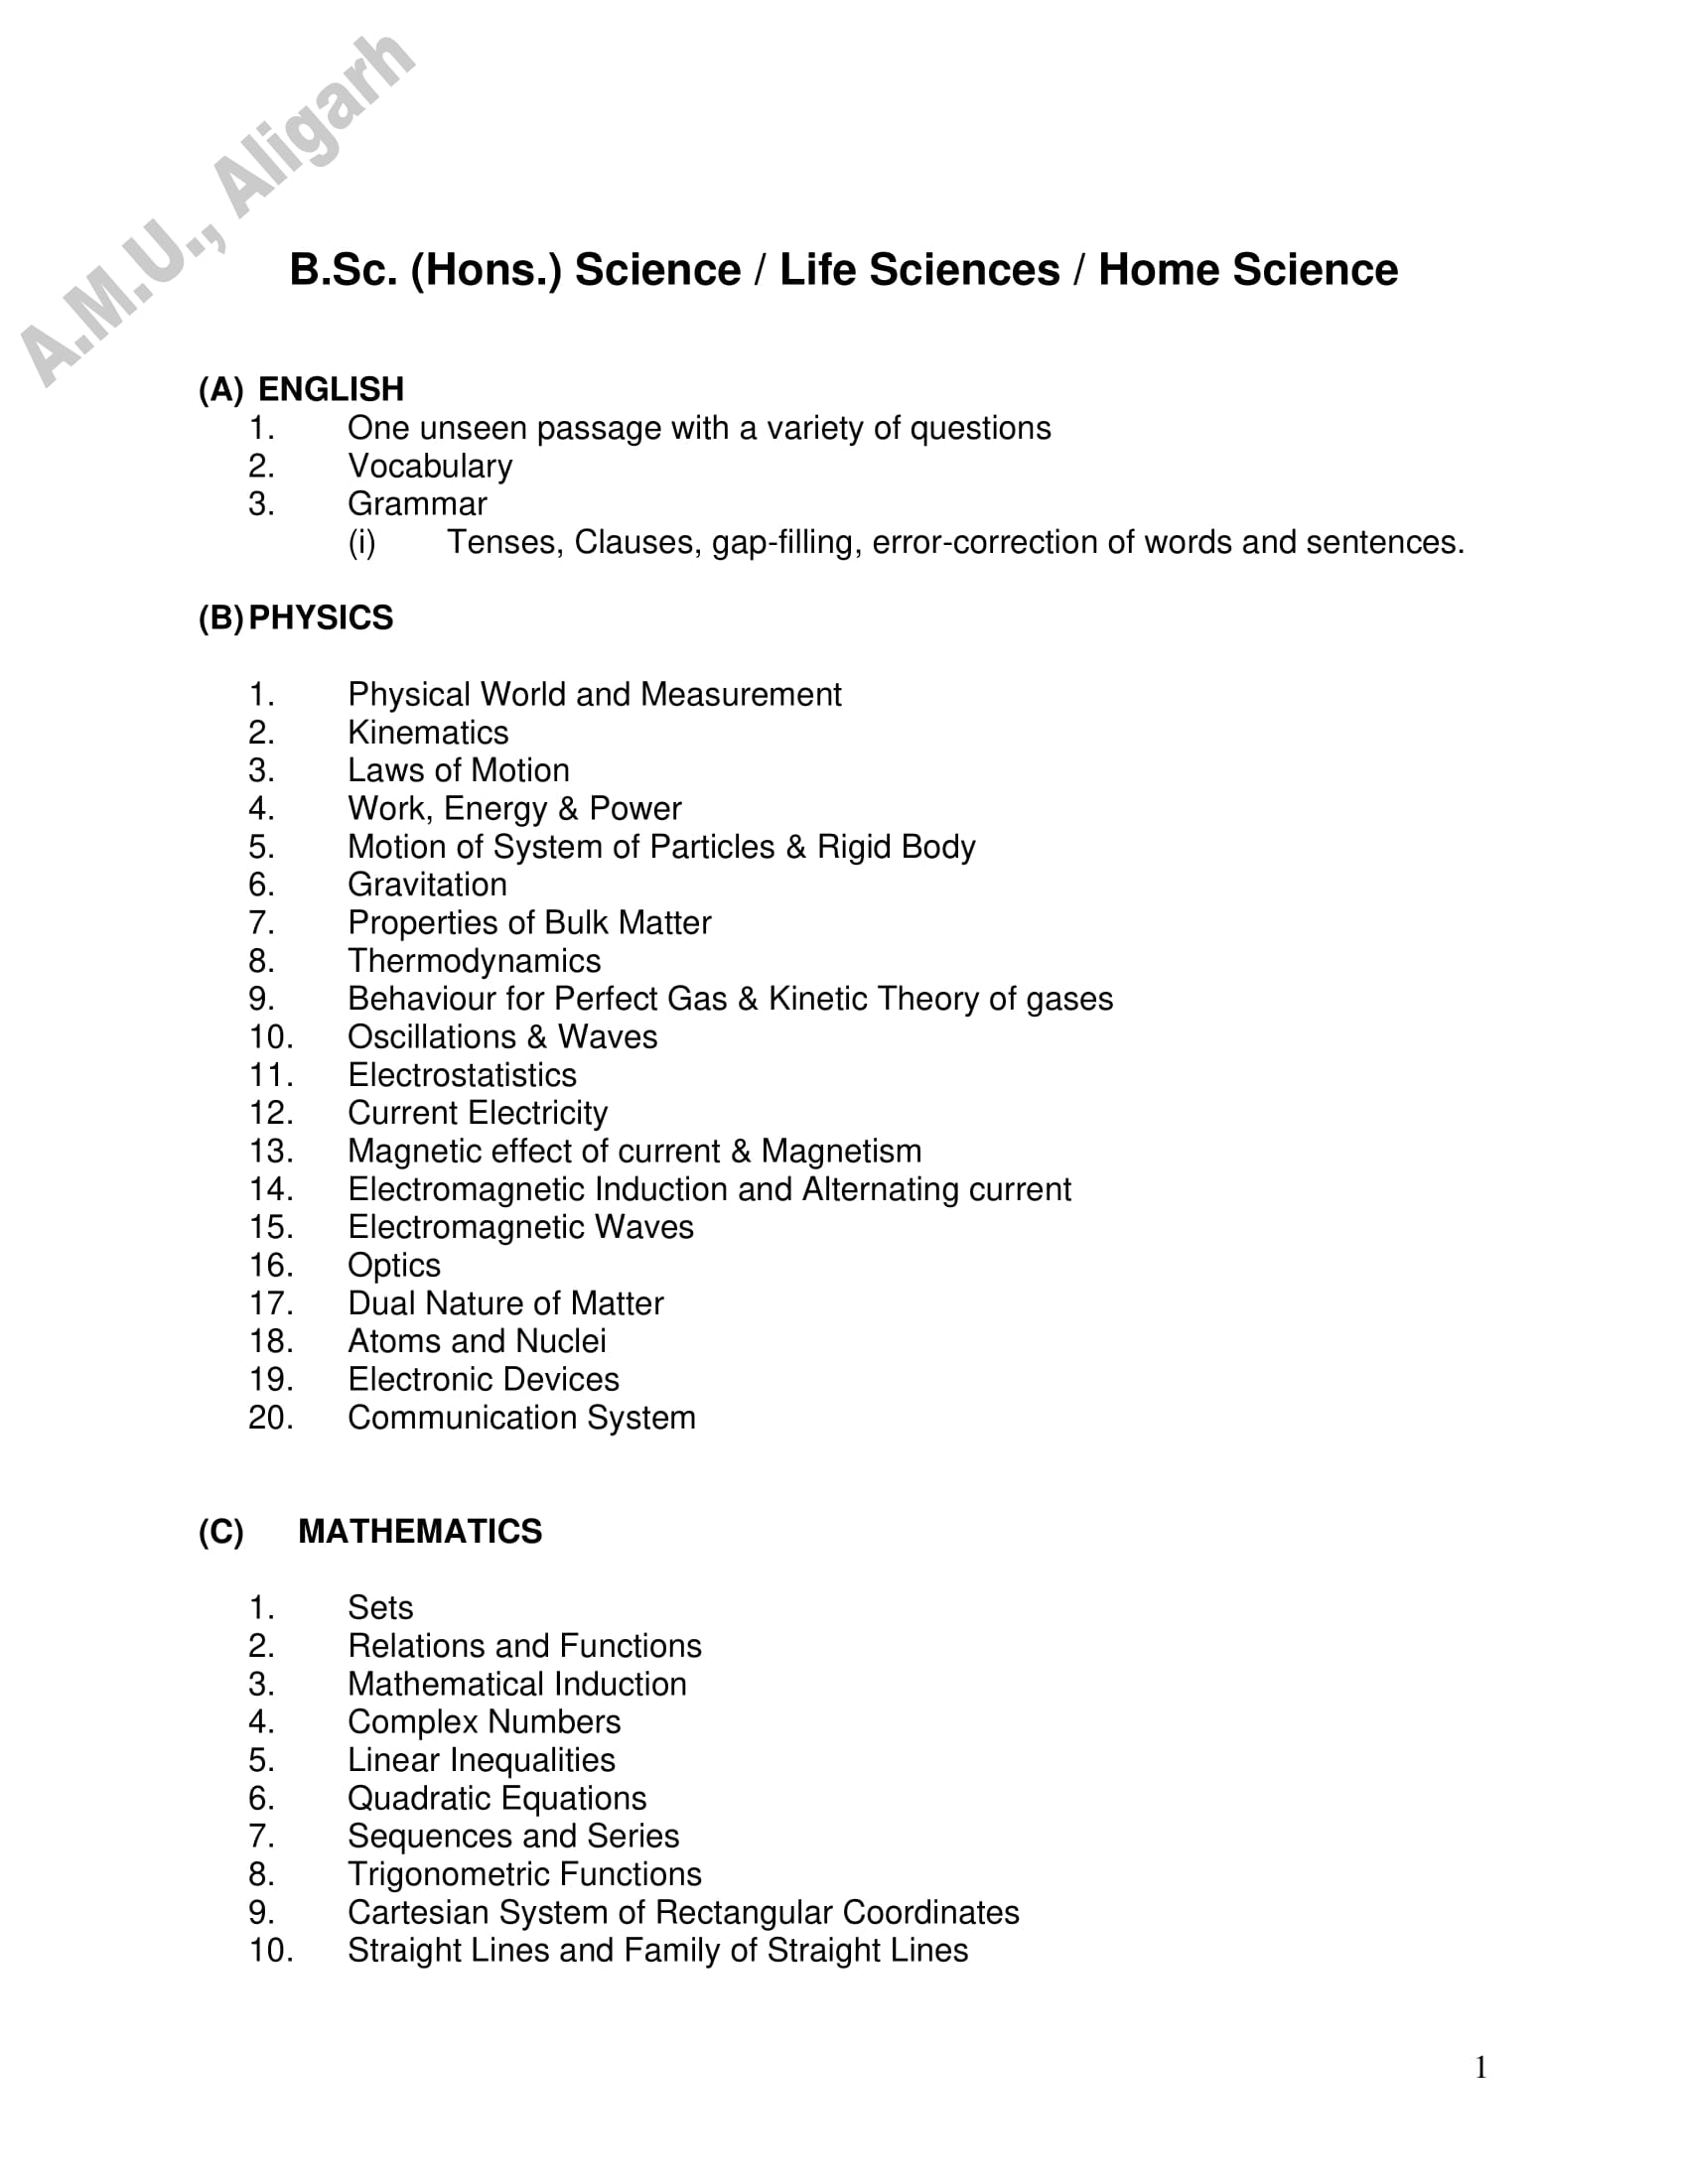 AMU Entrance Exam Syllabus for B.Sc (Hons.) in Science, Life Science & Home Science - Page 1